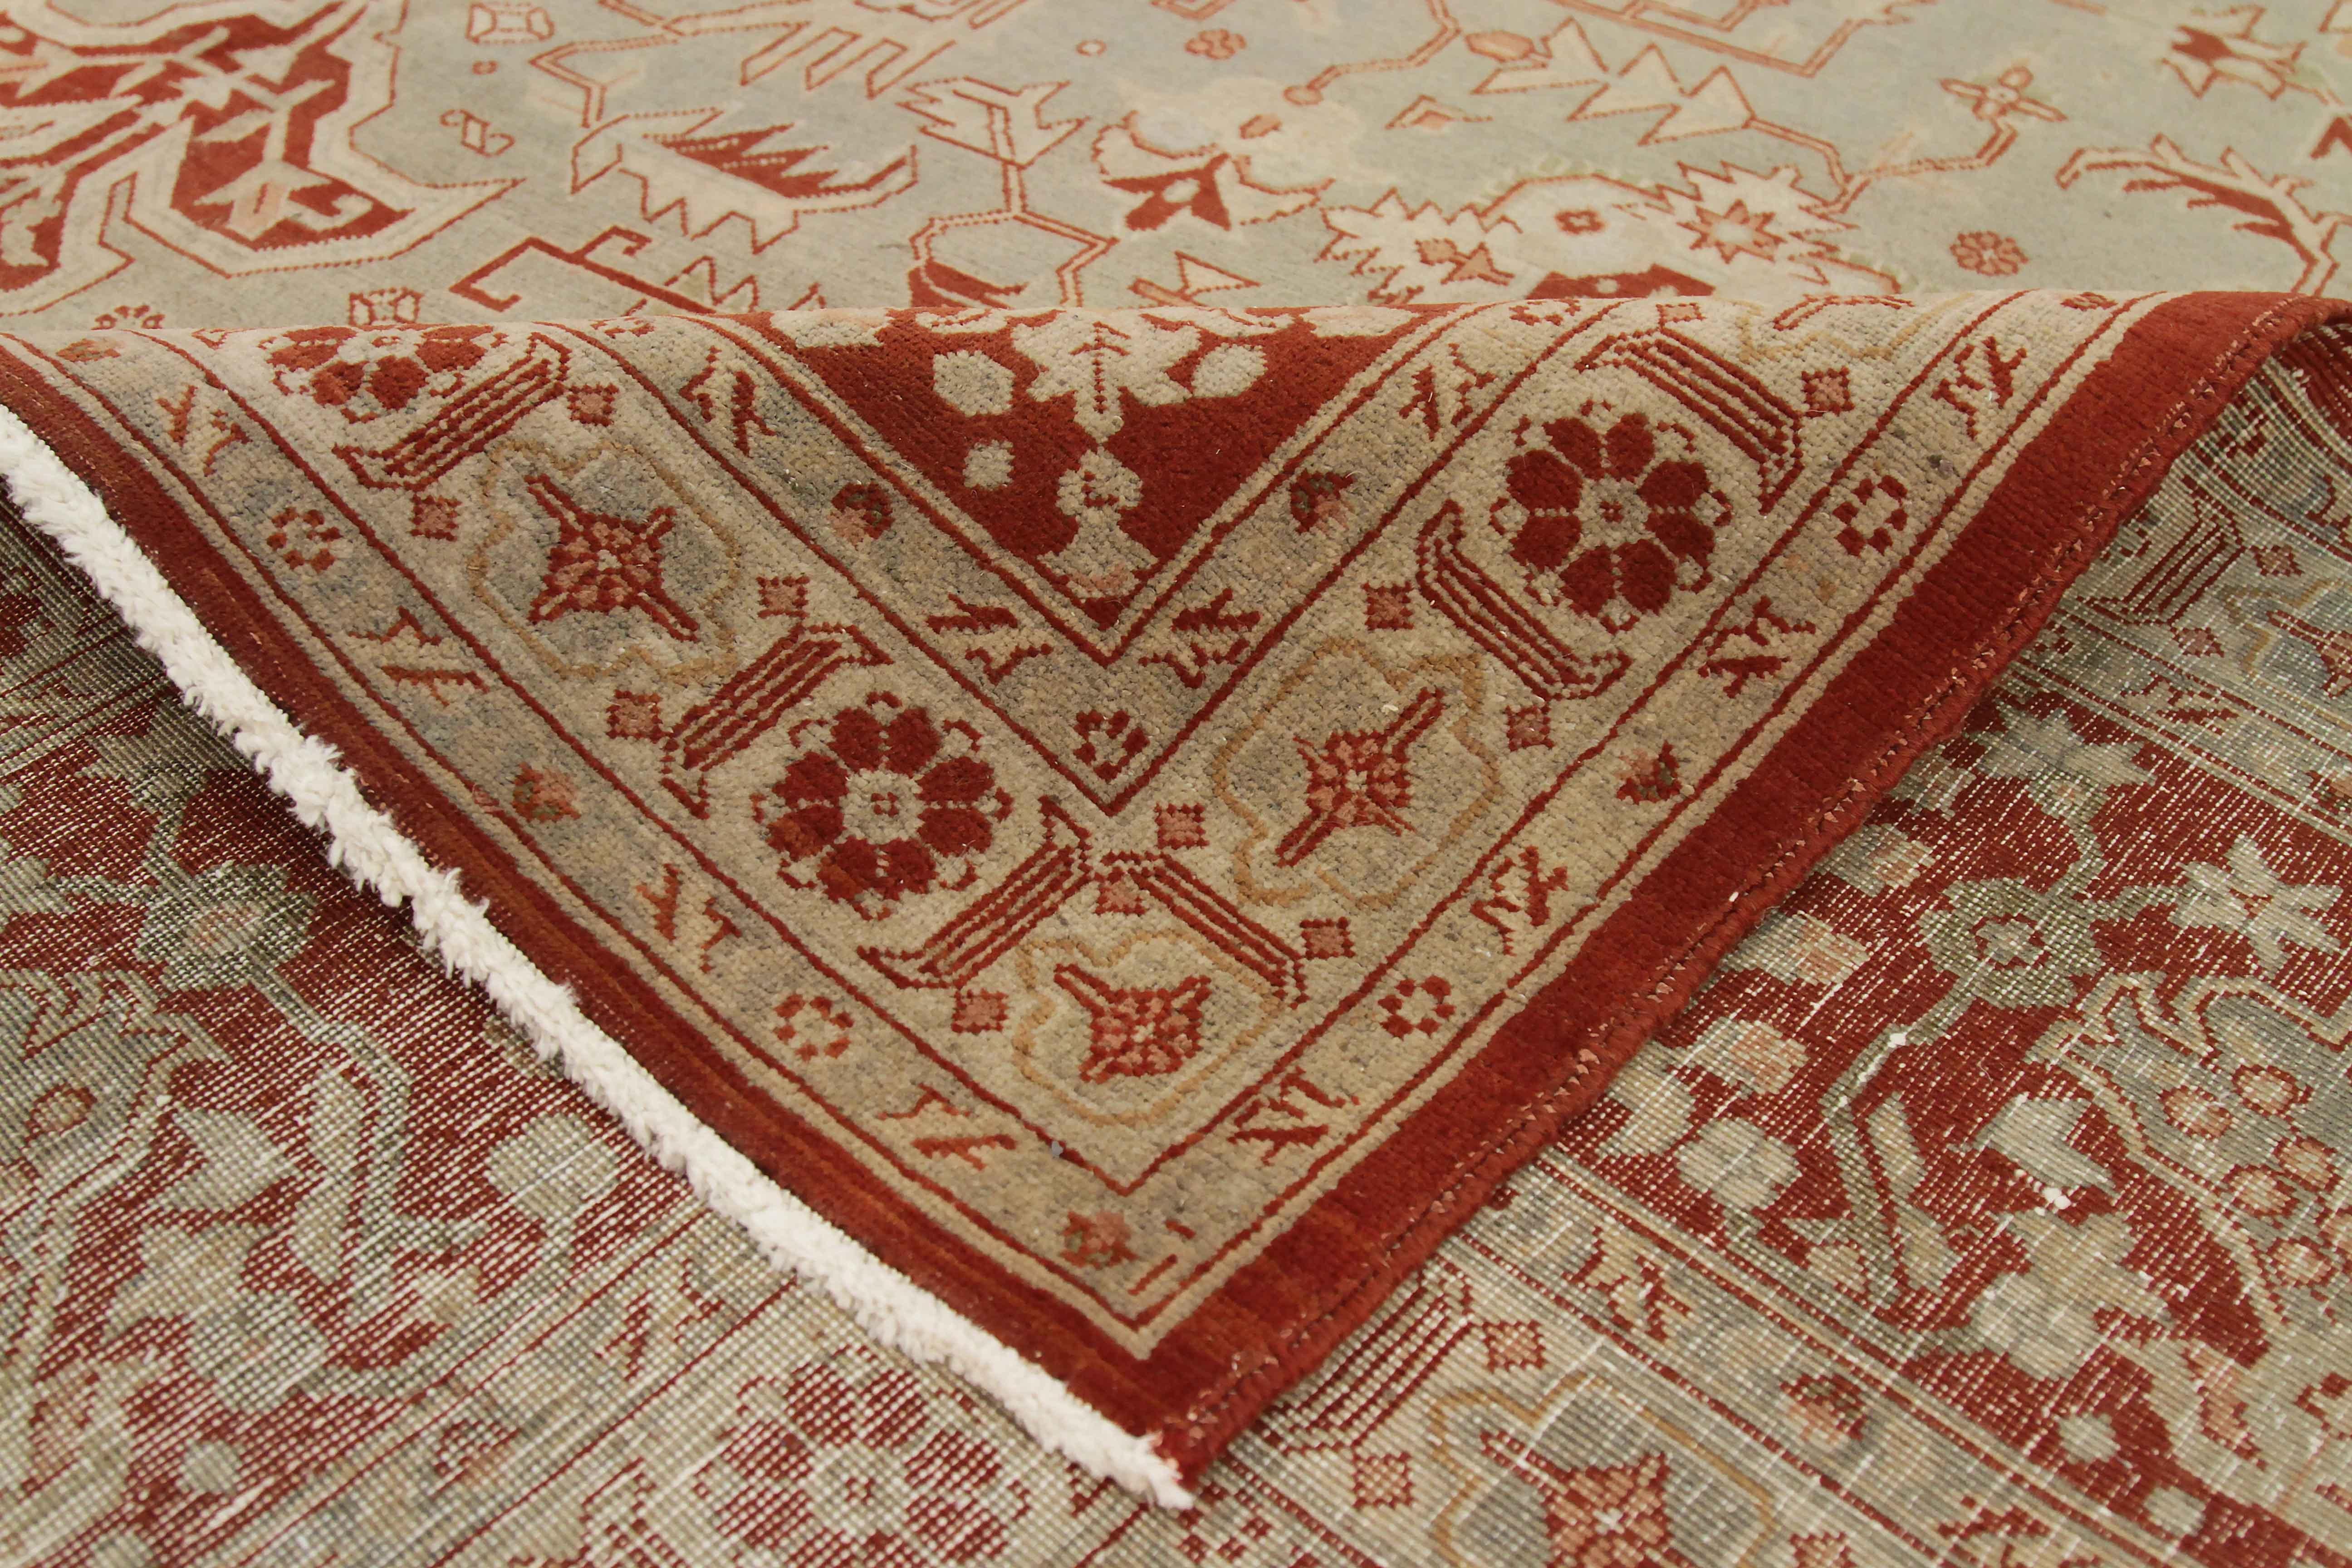 Wool Antique Persian Tabriz Rug with Floral Details on Red/Beige Field For Sale